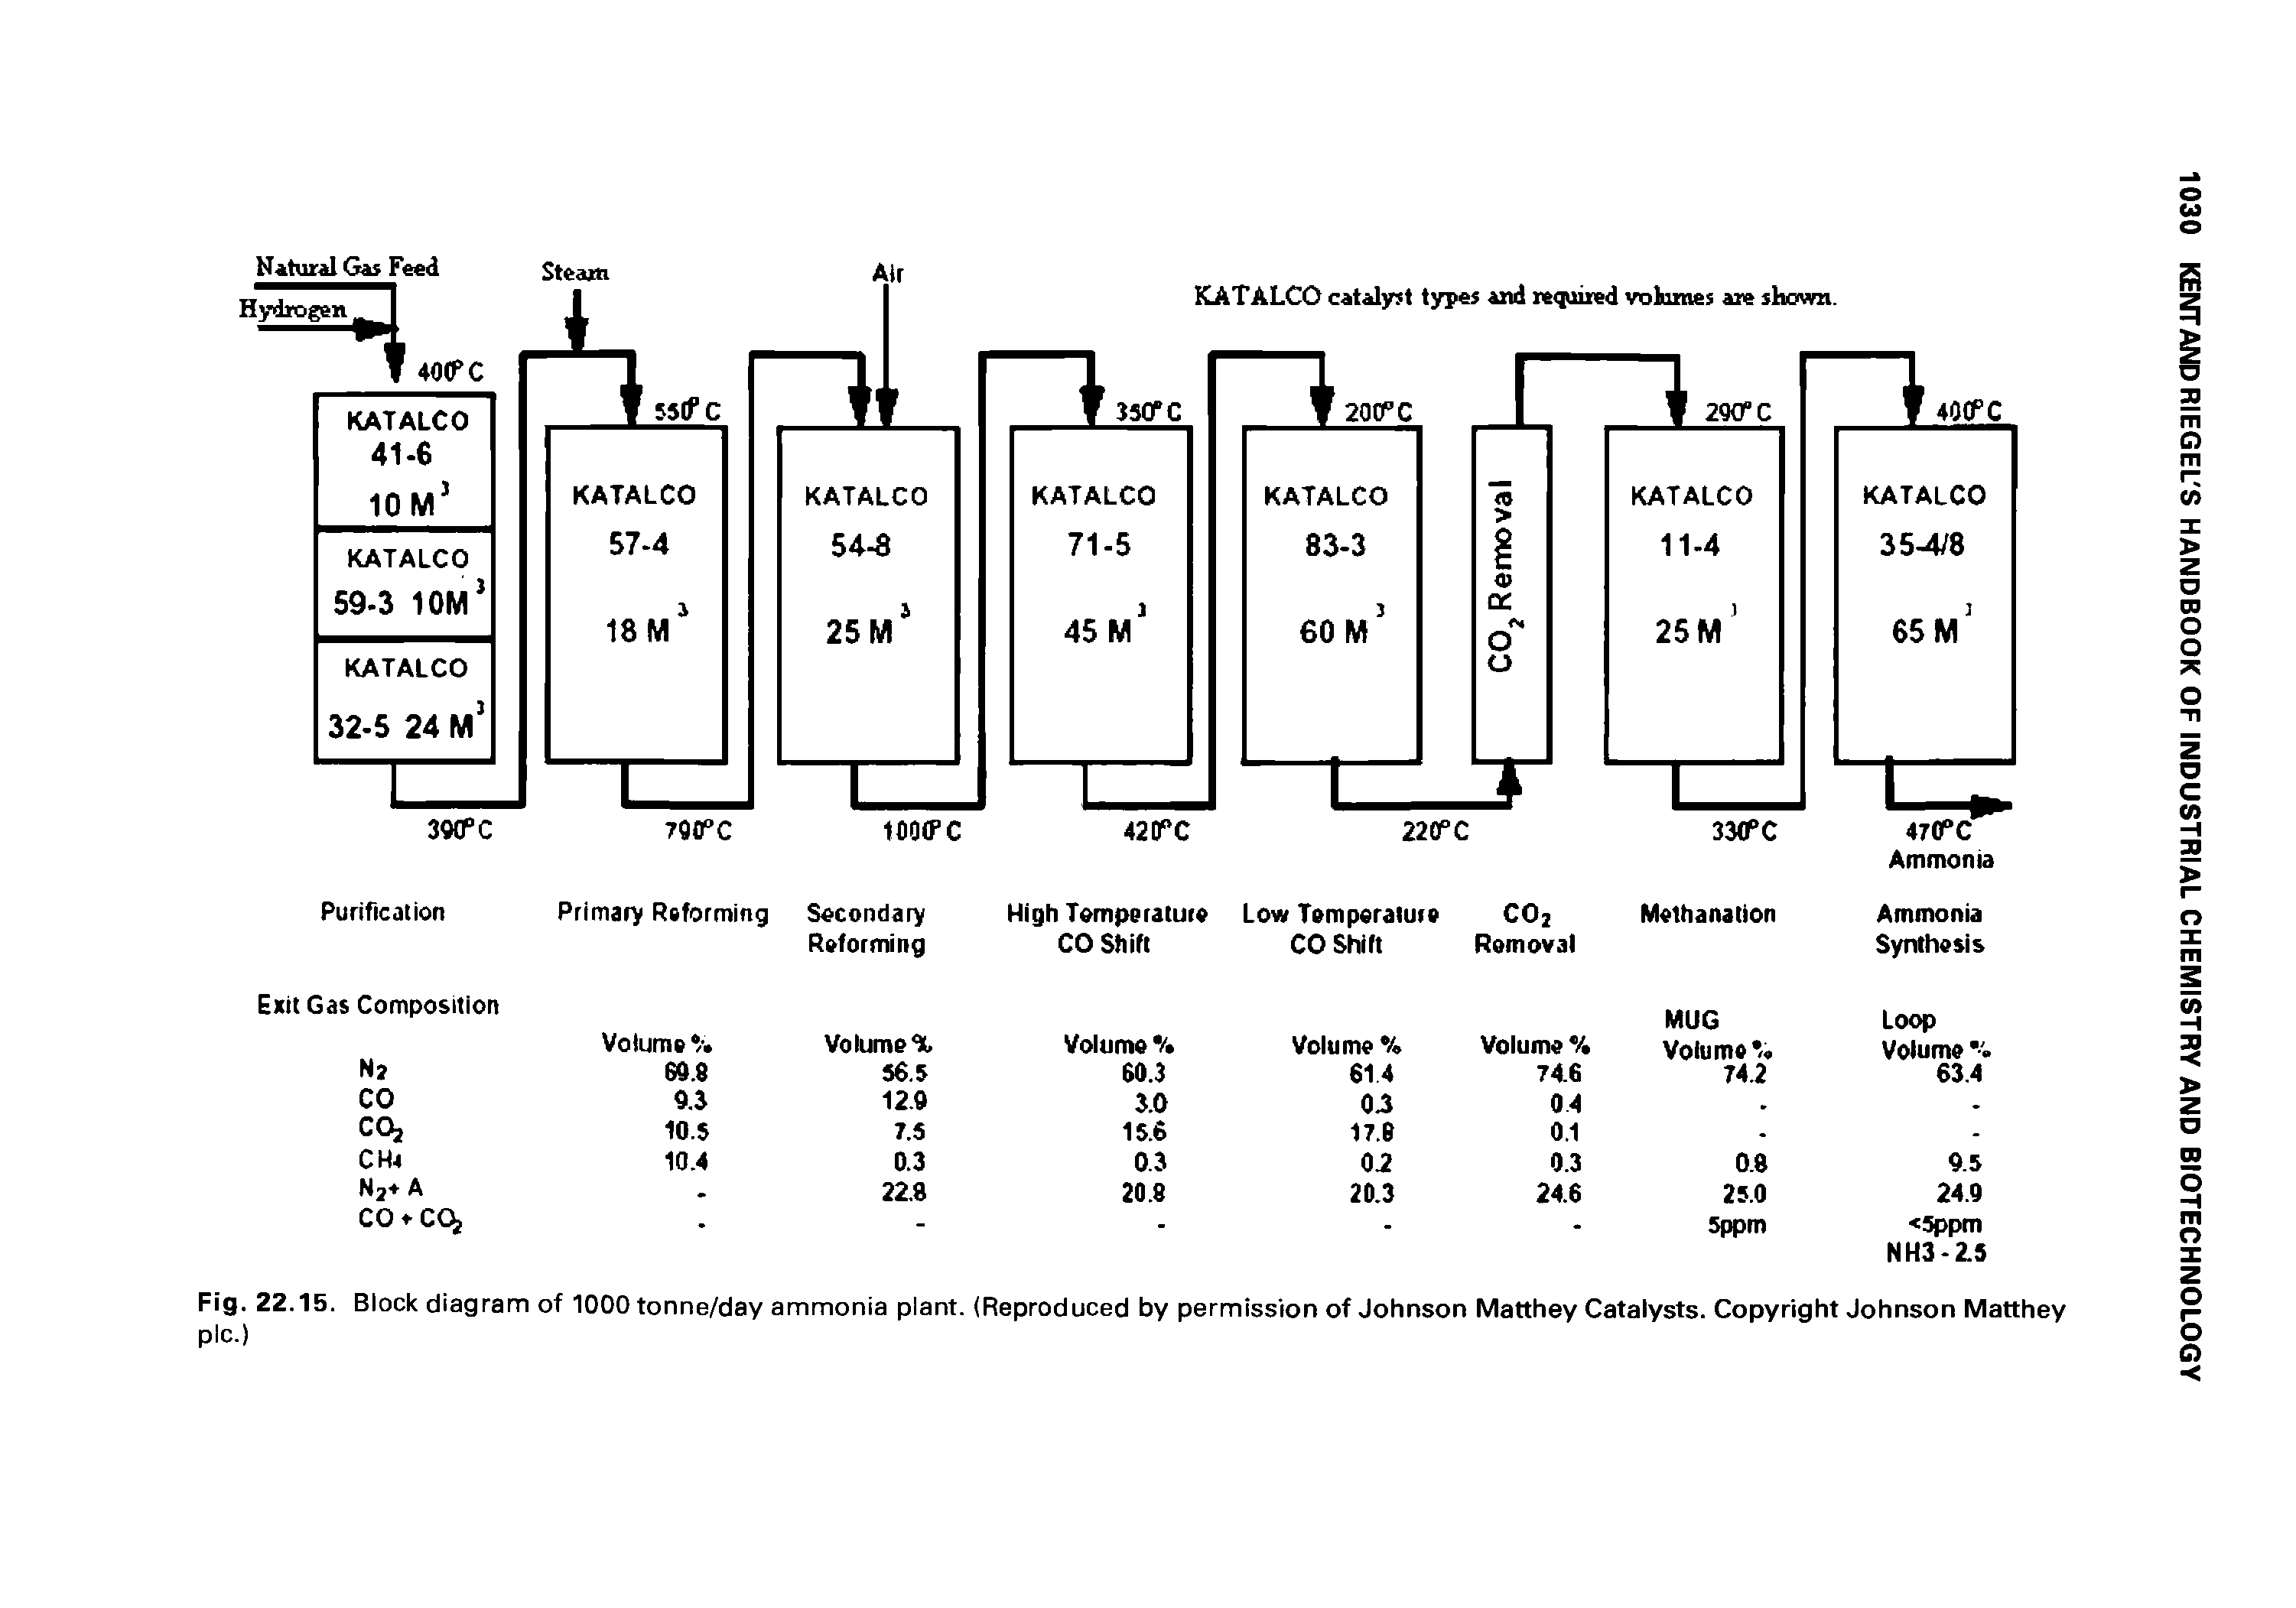 Fig. 22.15. Block diagram of 1000 tonne/day ammonia plant. (Reproduced by permission of Johnson Matthey Catalysts. Copyright Johnson Matthey pic.)...